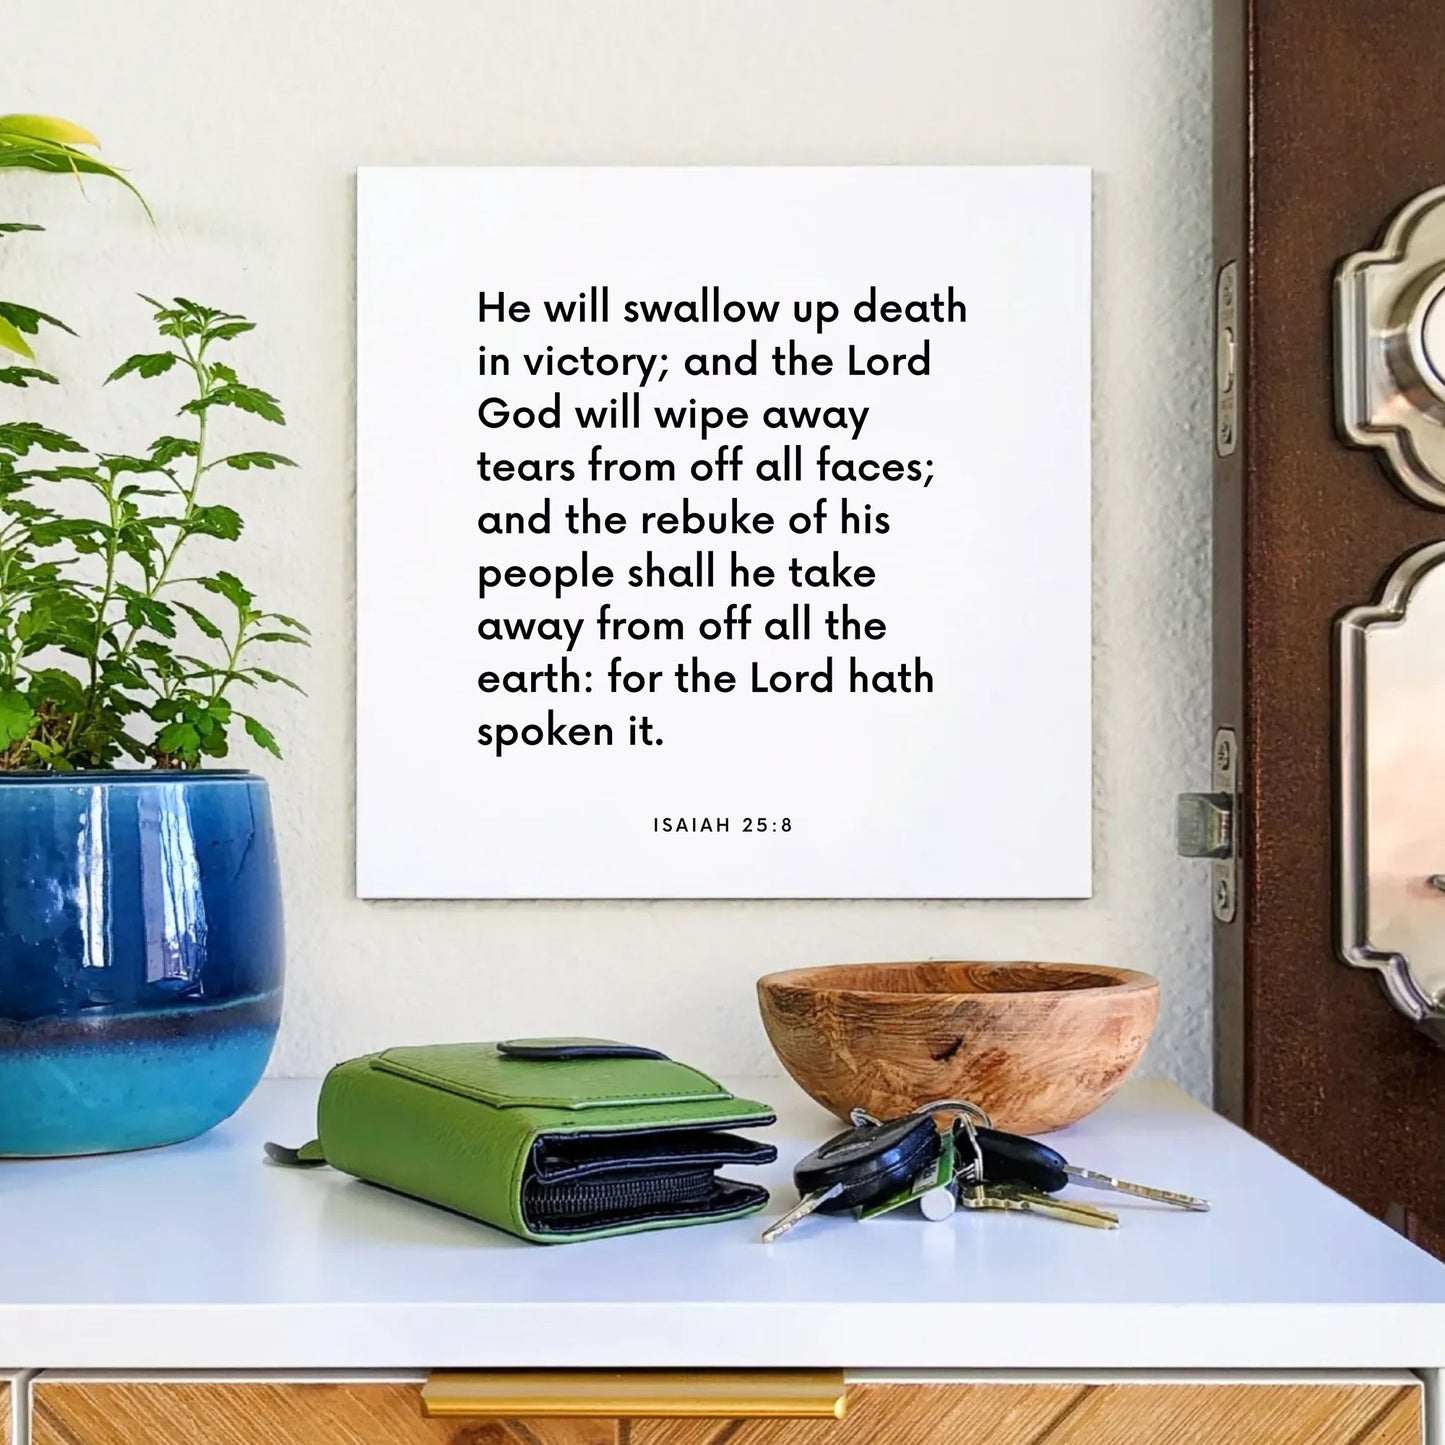 Entryway mouting of the scripture tile for Isaiah 25:8 - "God will wipe away tears from off all faces"